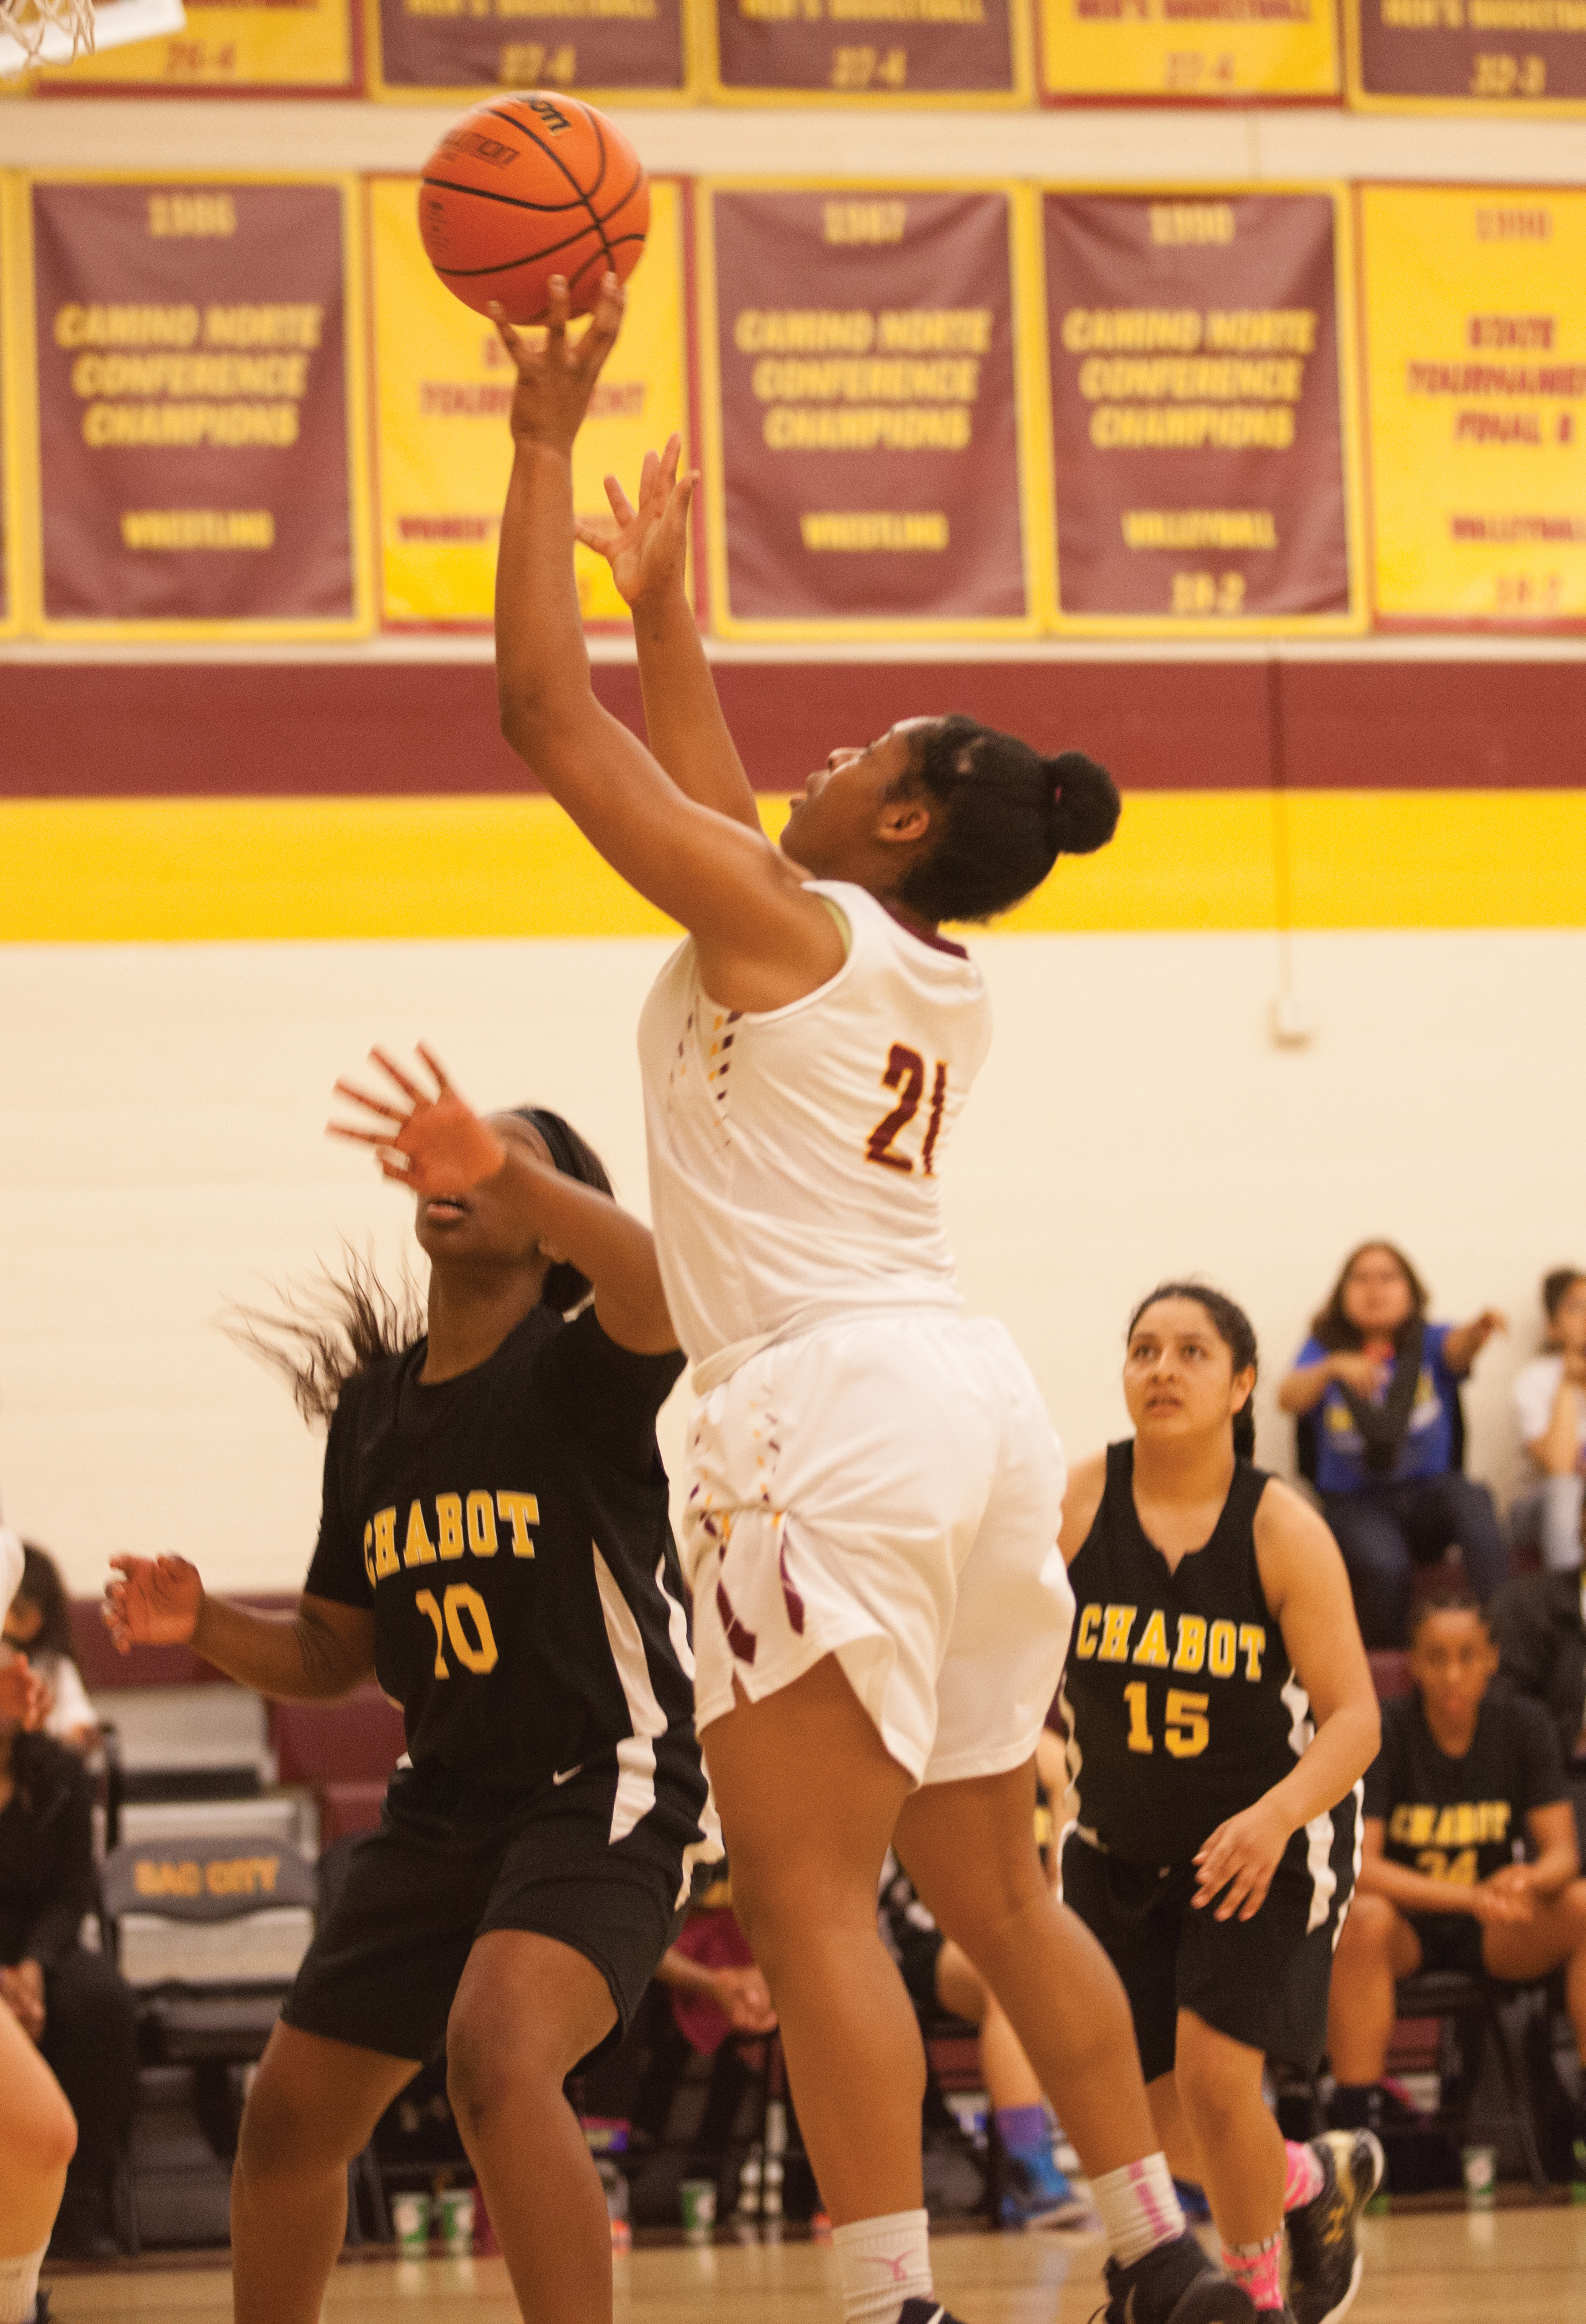 City College student Kristen Gooding scores in the second quarter of the game against Chabot Saturday Feb 27. The panthers went on to win 72-65 Photo By Vanessa S. Nelson • vanessanelsonexpress@gmail.com